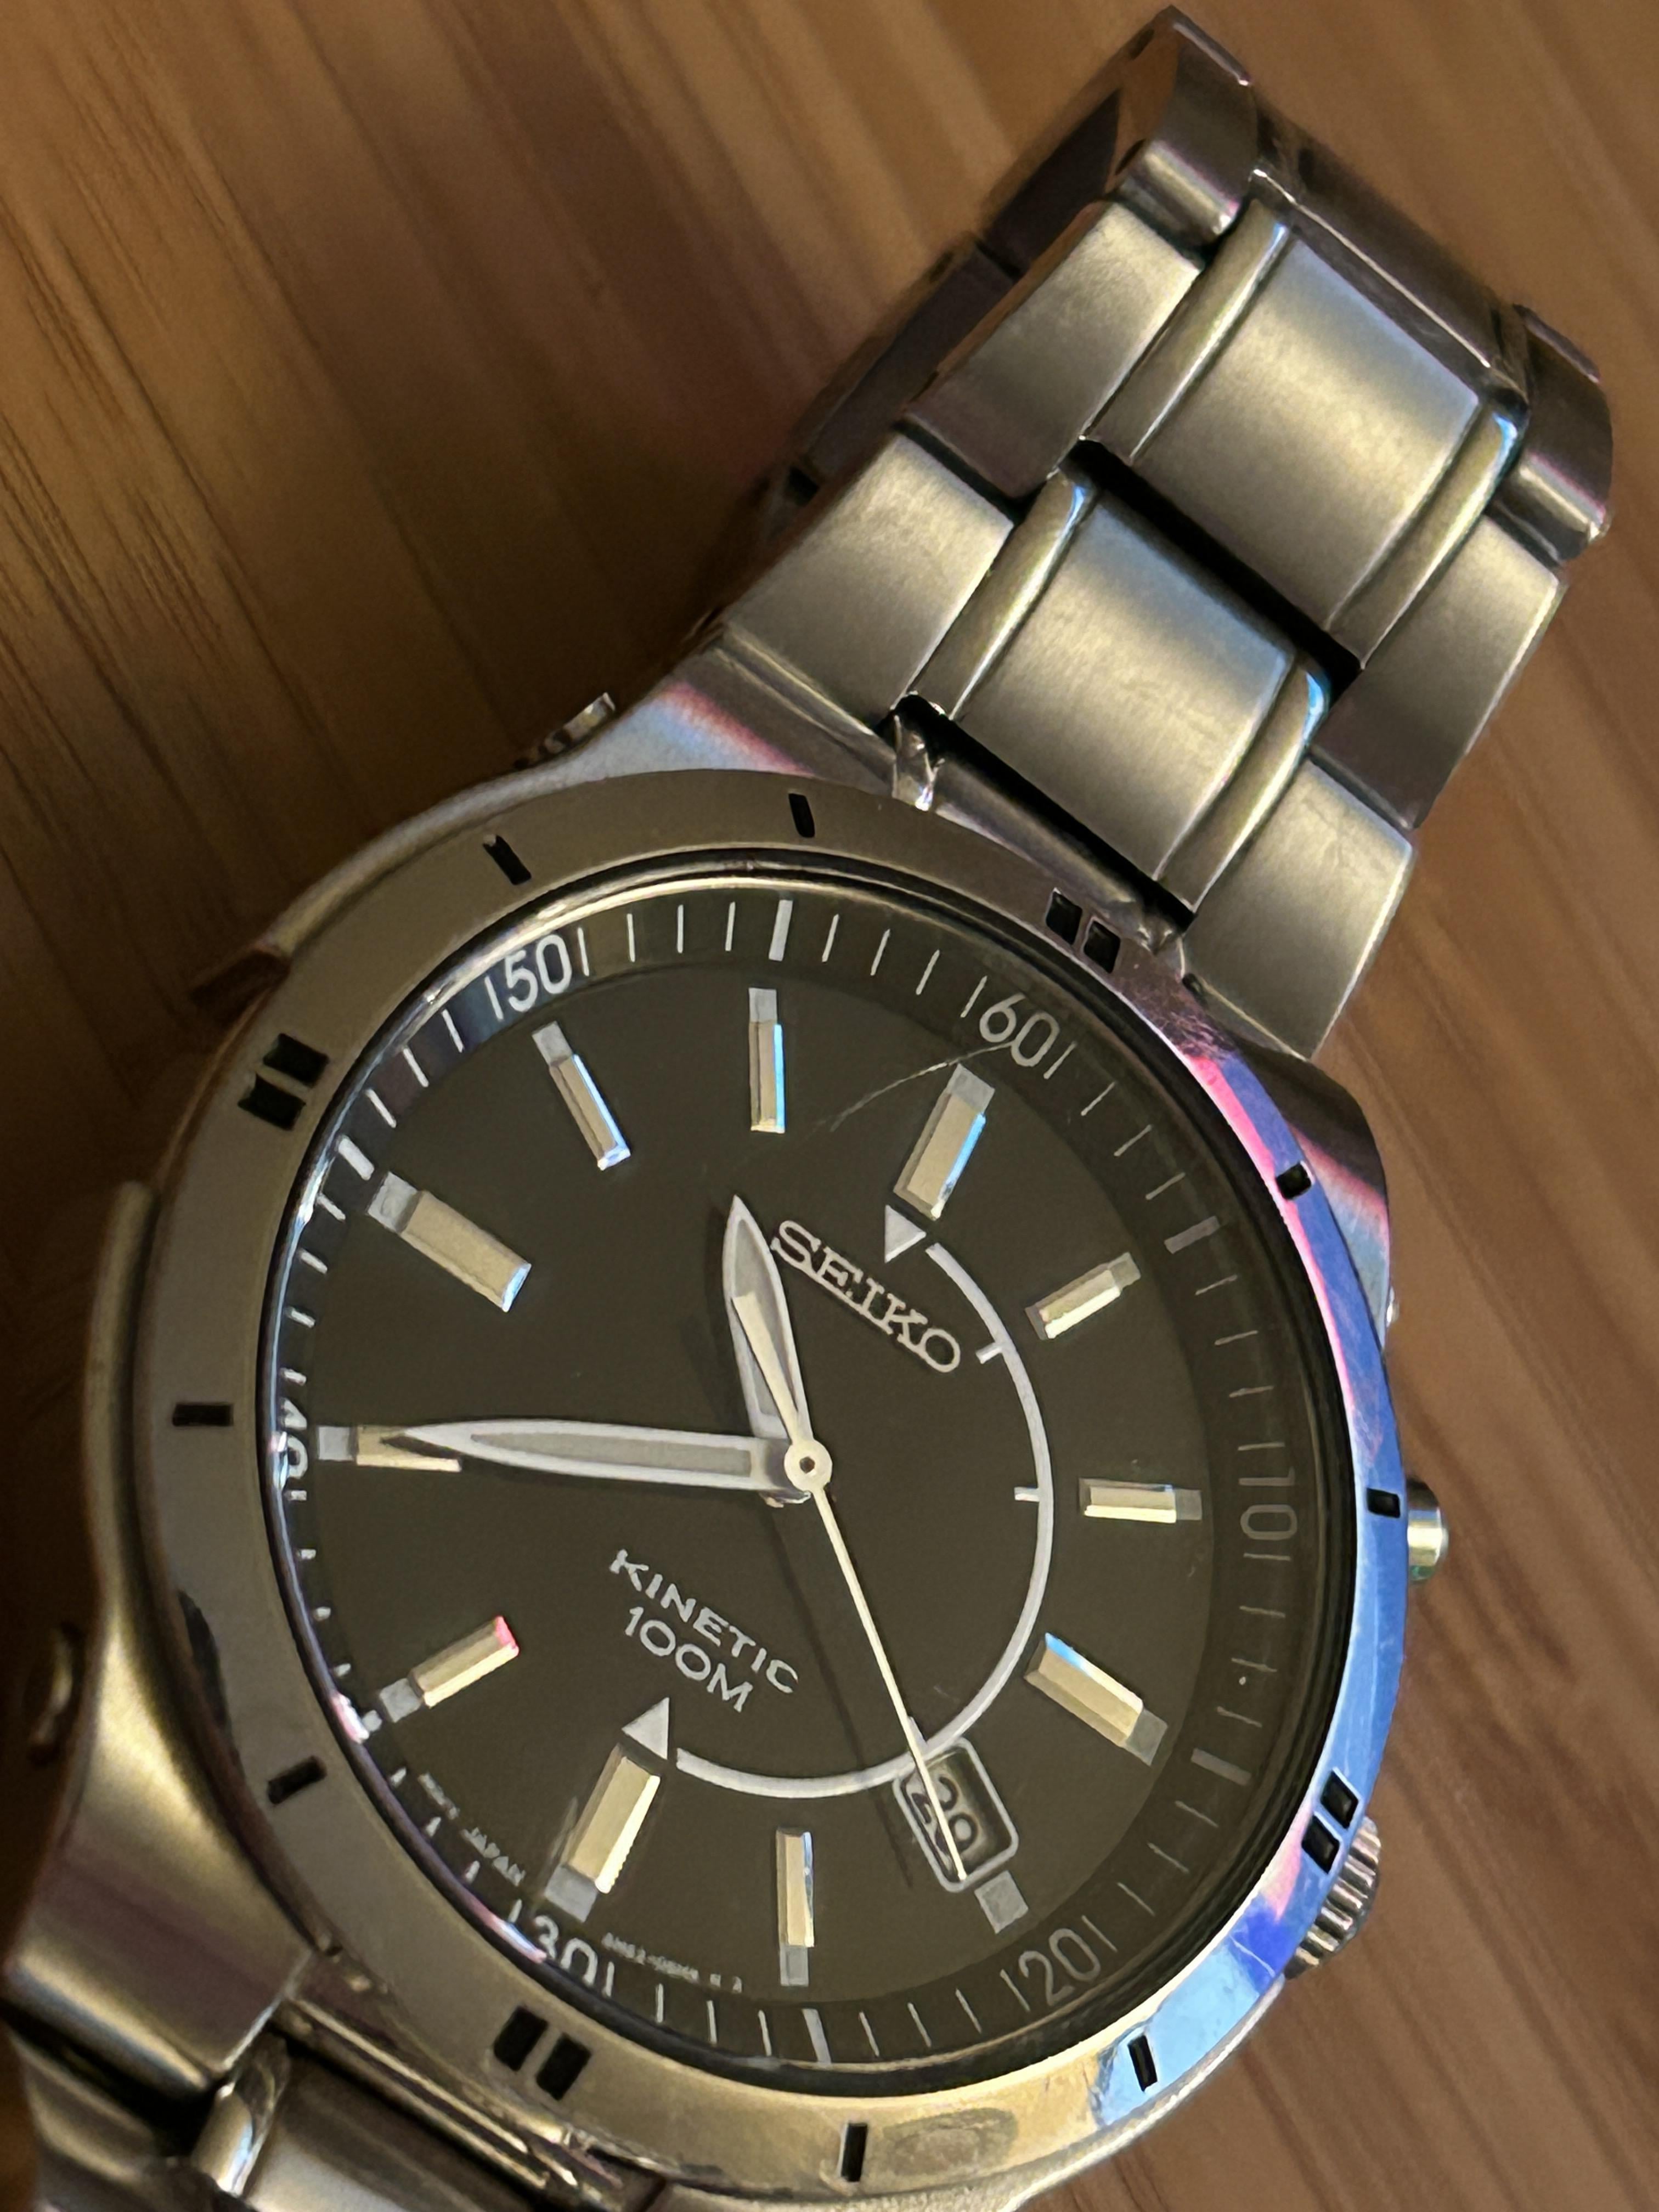 WTS] Seiko Kinetic 5M62-0BJ0 good but needs capacitor | WatchCharts